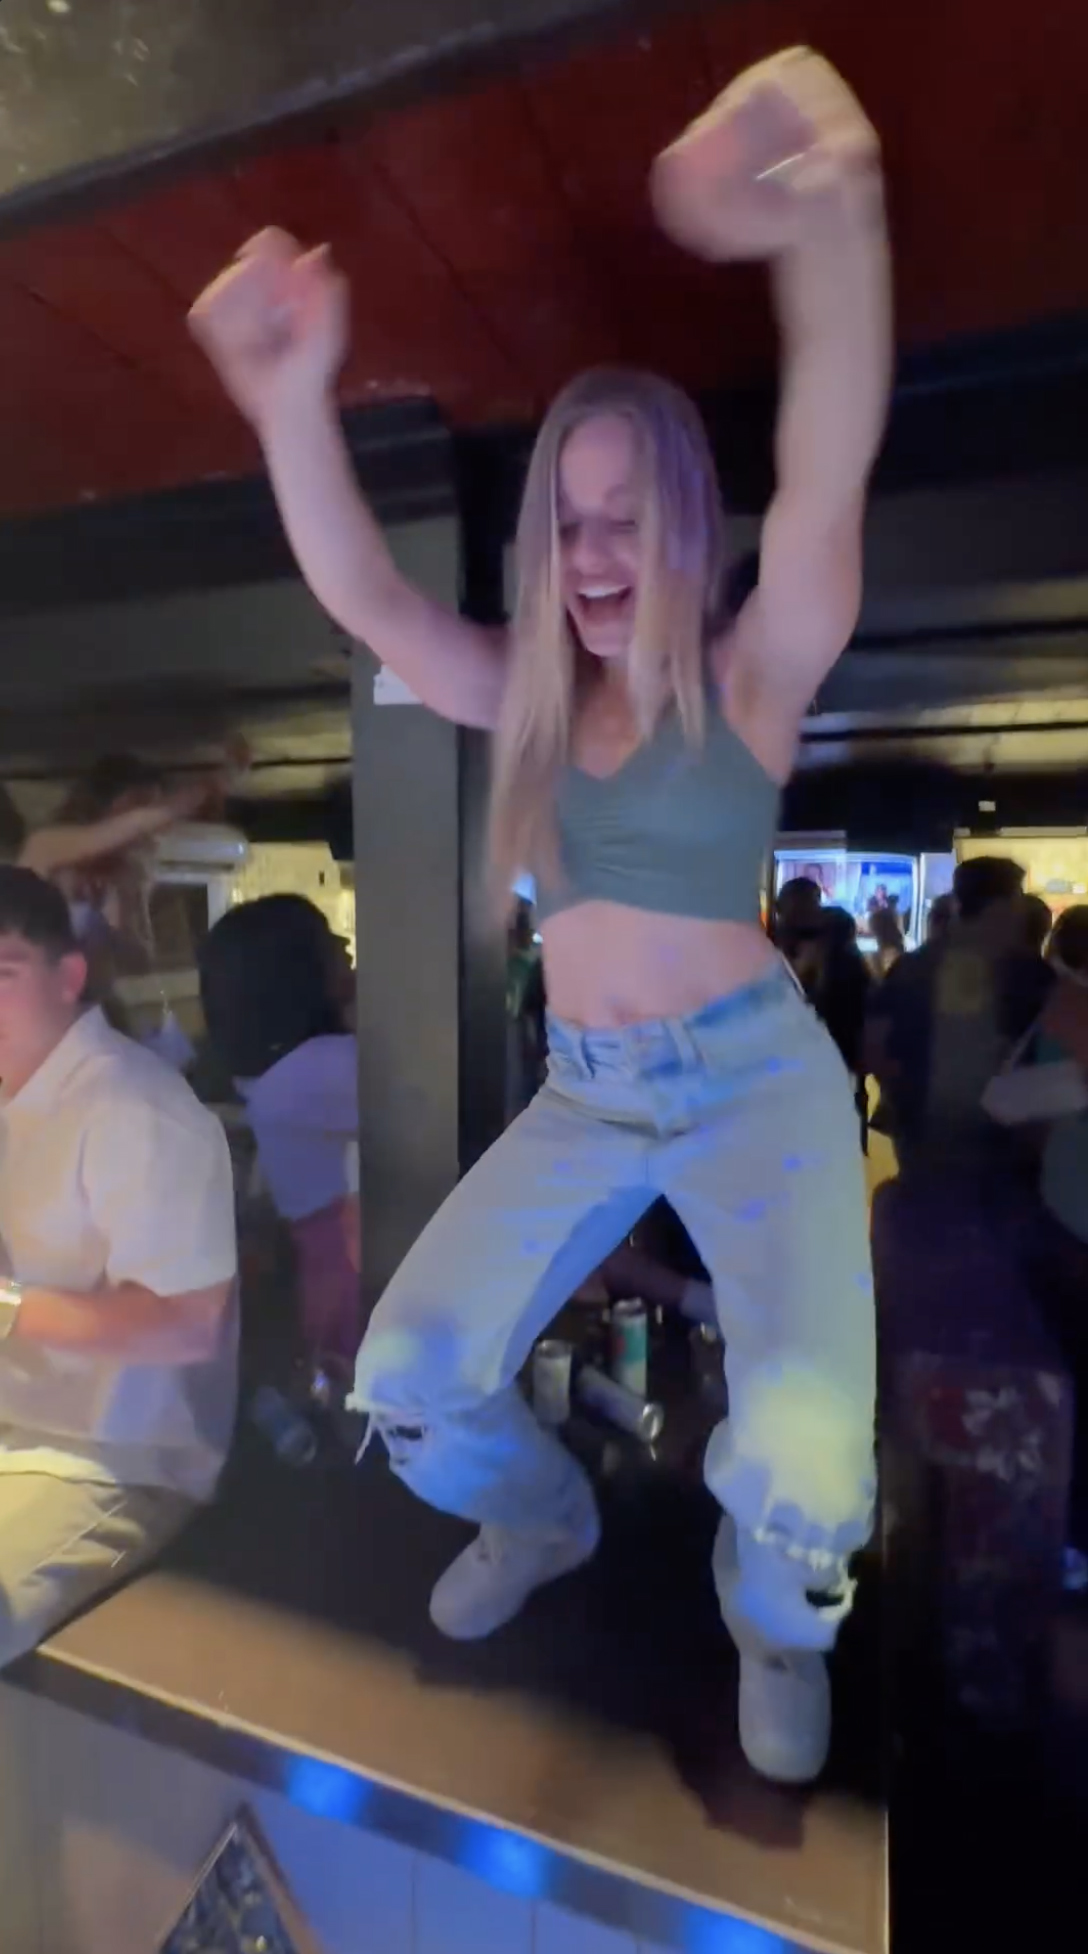 In the short video, Mackenzie was captured dancing on top of a bar to the rhythm of thumping club music